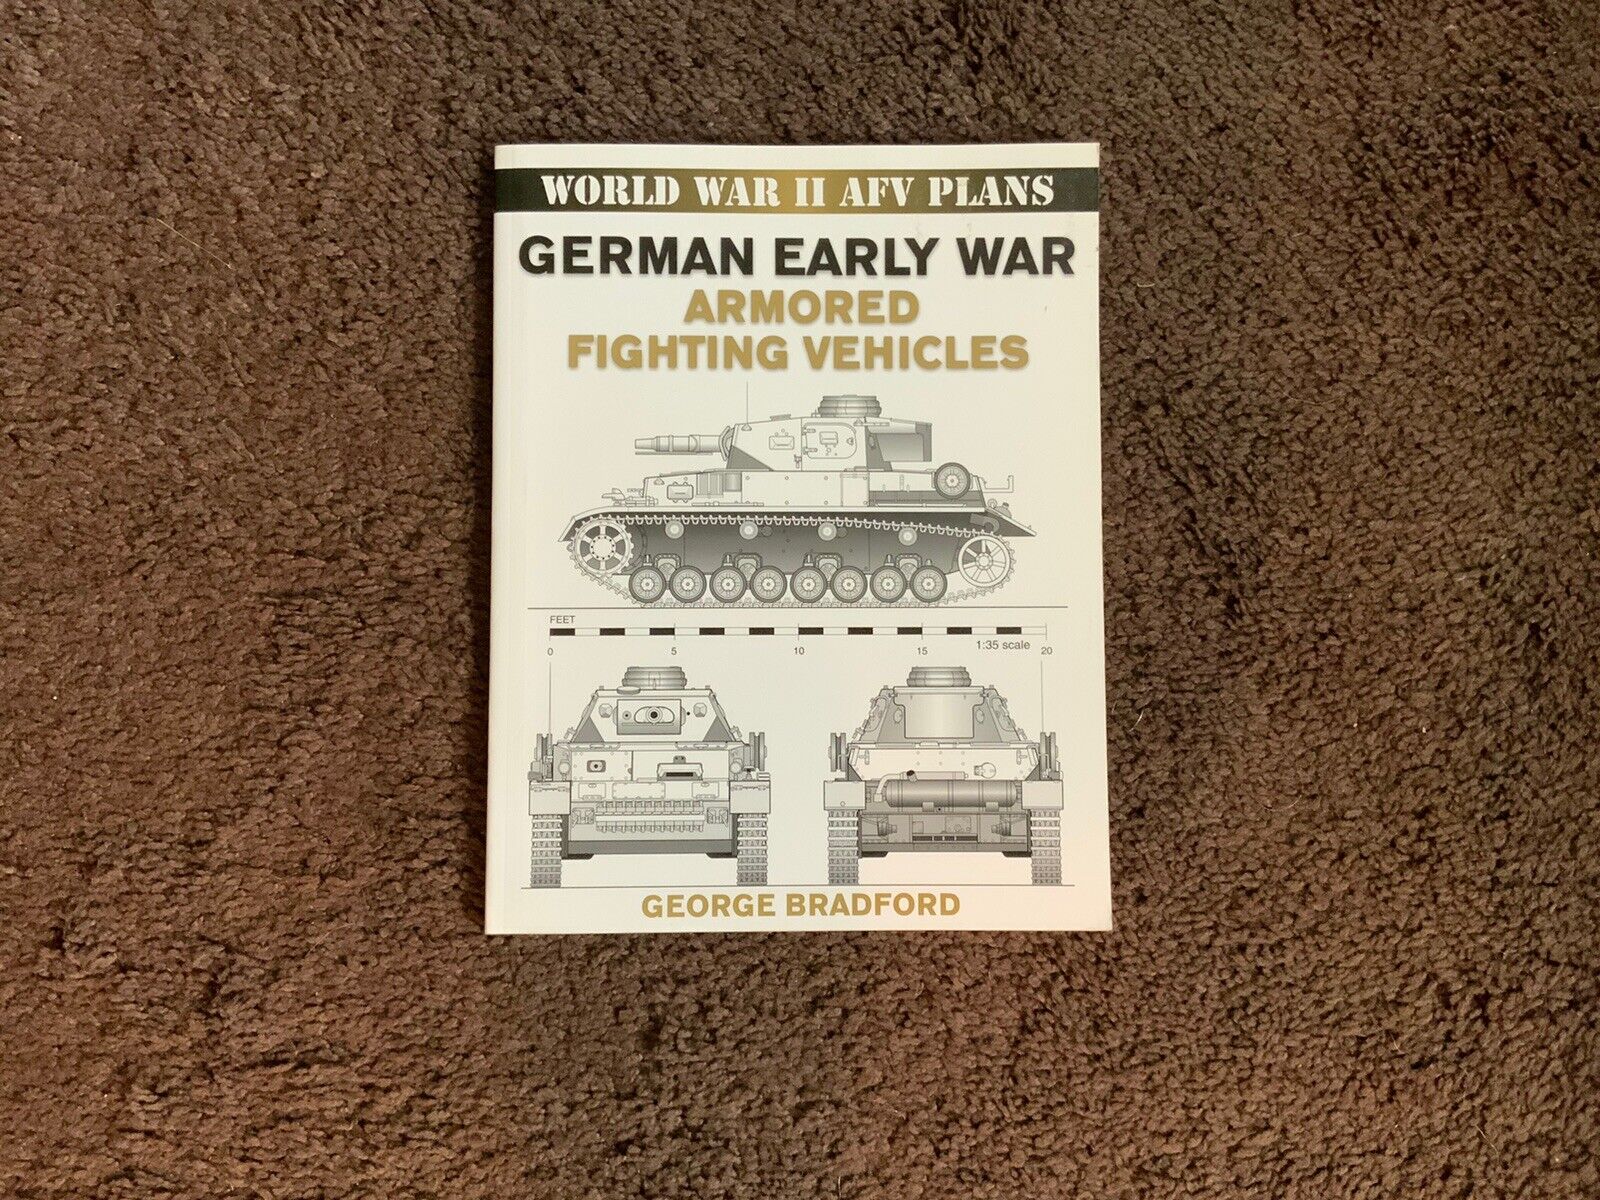 German Early War Armored Fighting Vehicles, WW2 AFV Plans Book